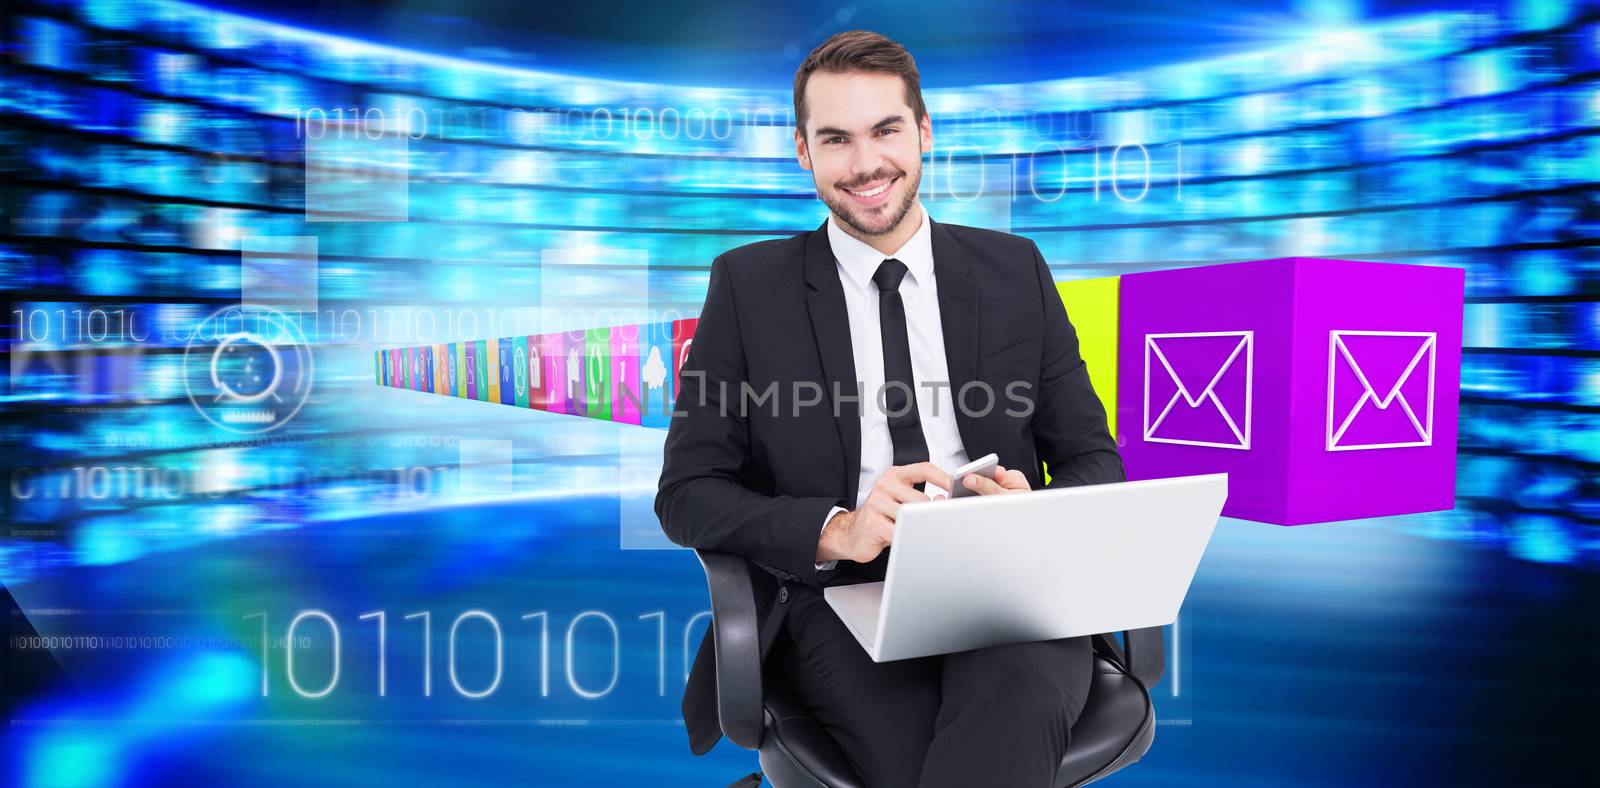 Composite image of happy businessman with laptop using smartphone by Wavebreakmedia